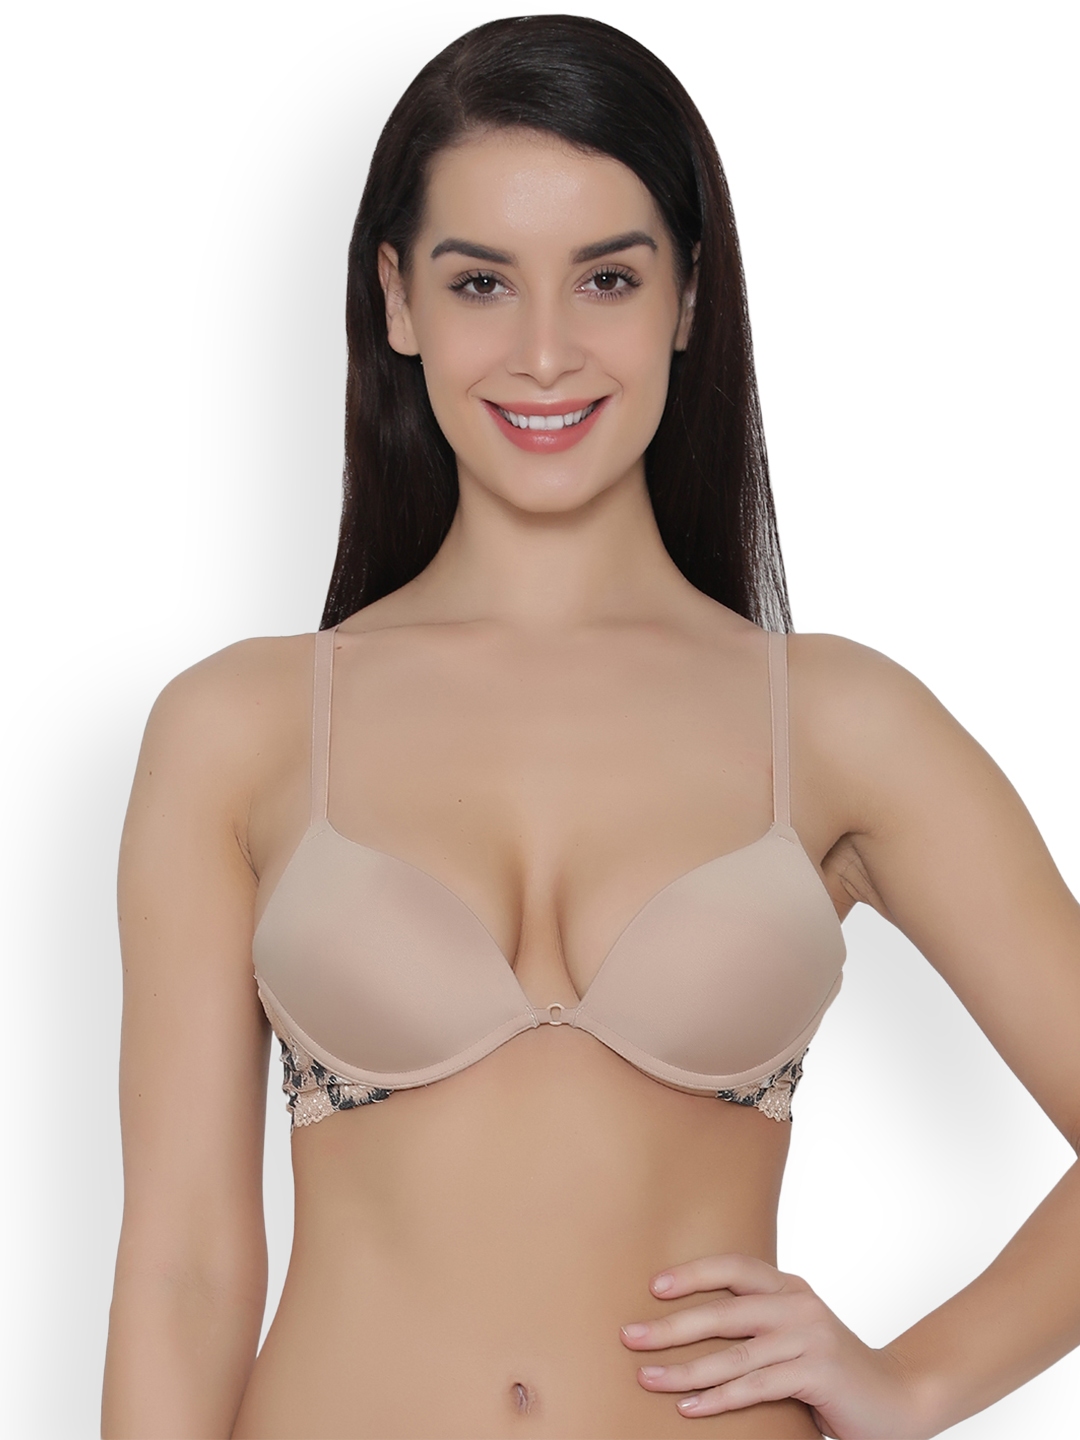 Clovia Women's Polyamide Solid Padded Demi Cup Underwired Push-Up